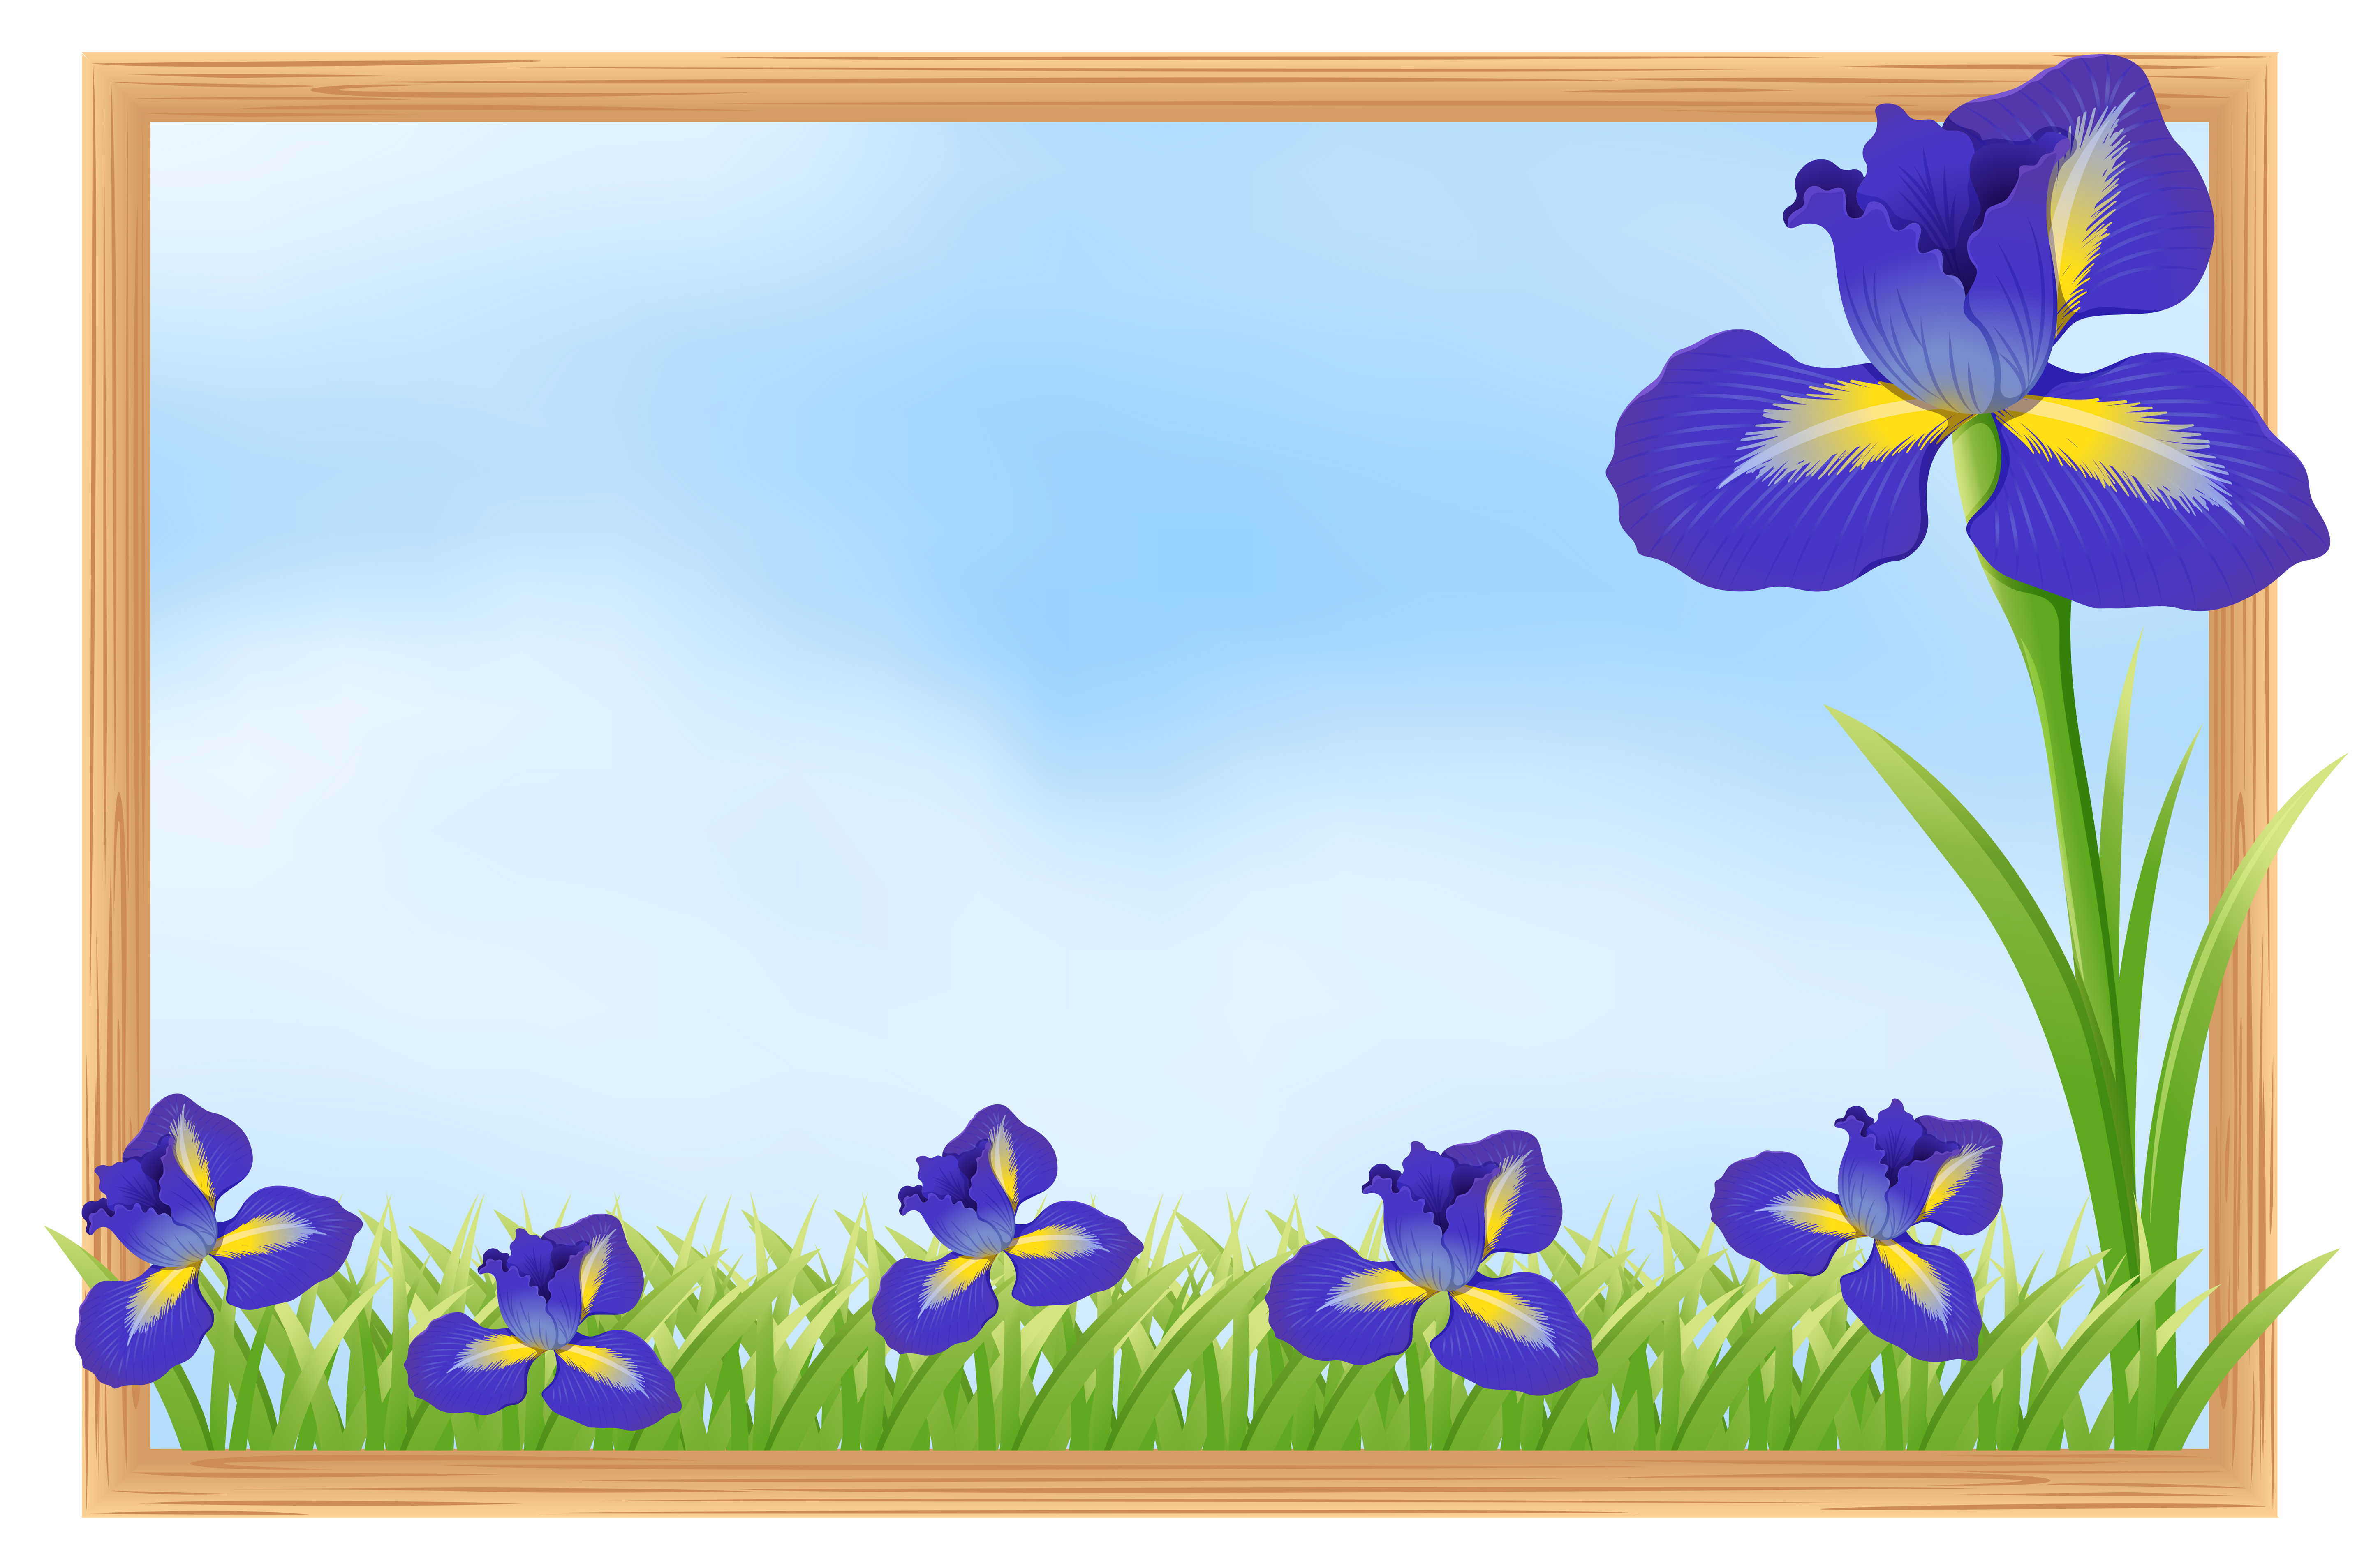  Frame design  with blue flowers 446599 Download Free 